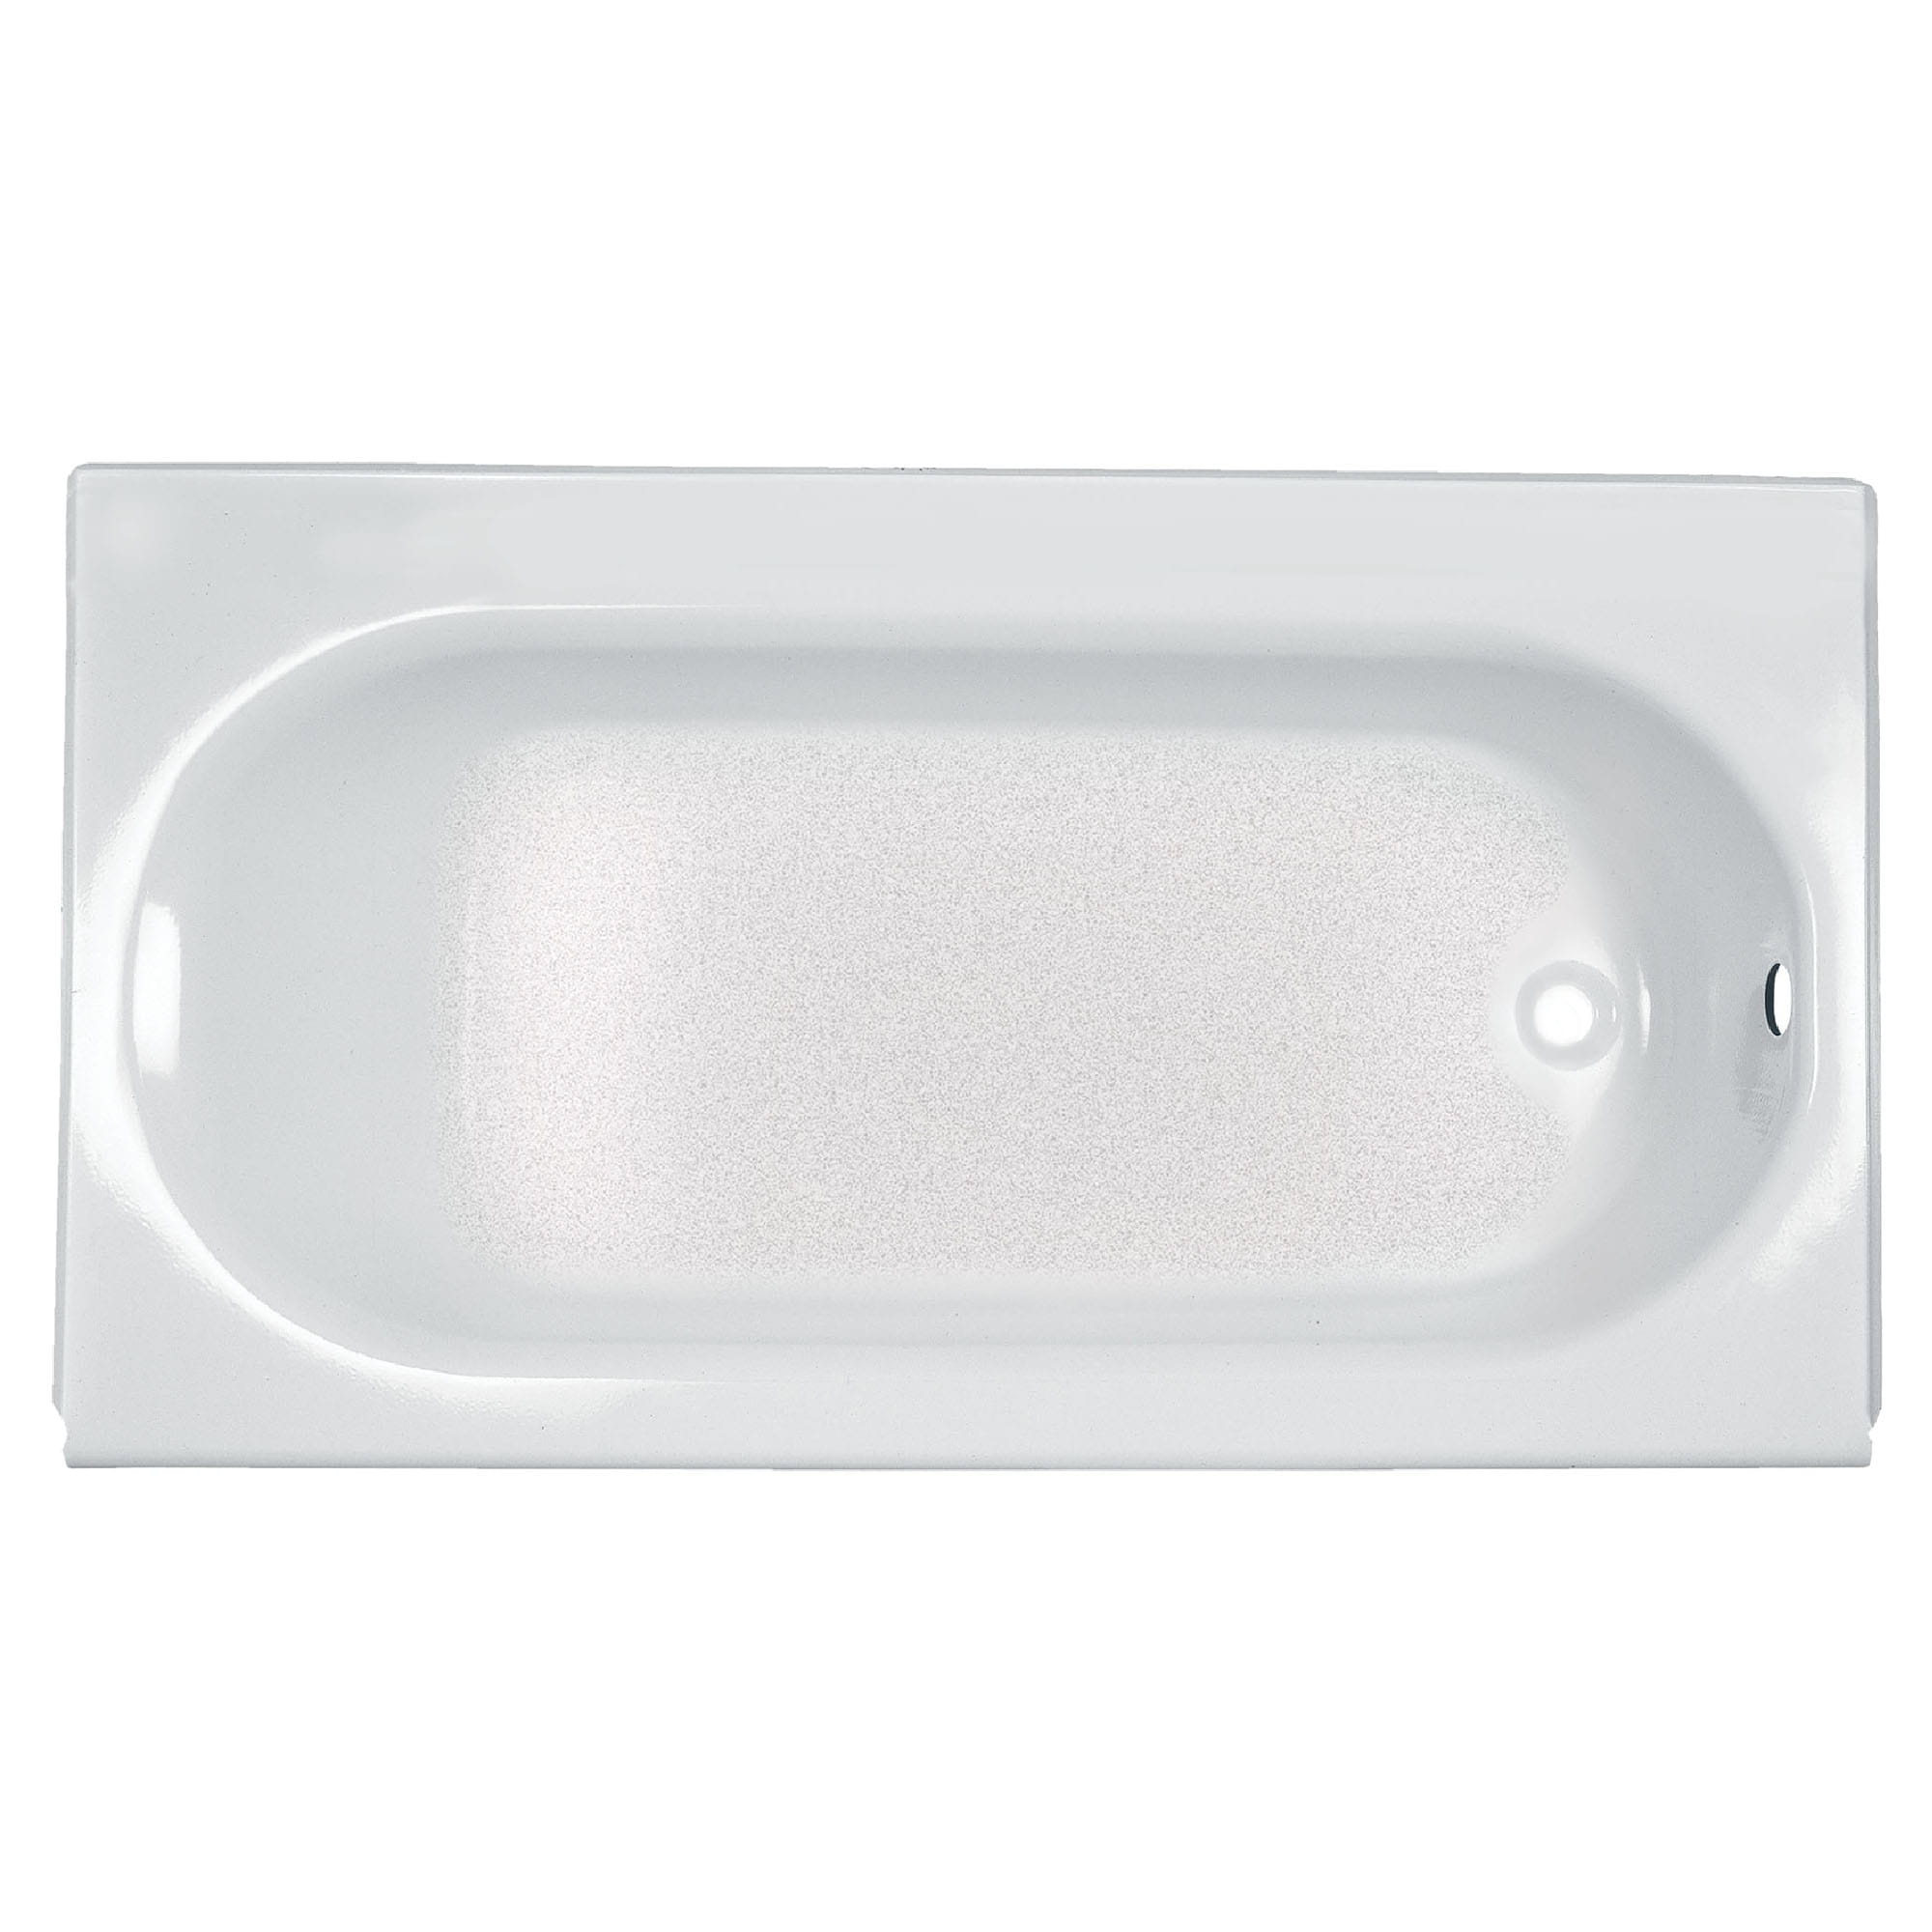 Princeton Americast 60 x 34 Inch Integral Apron Bathtub Right Hand Outlet with Luxury Ledge WHITE